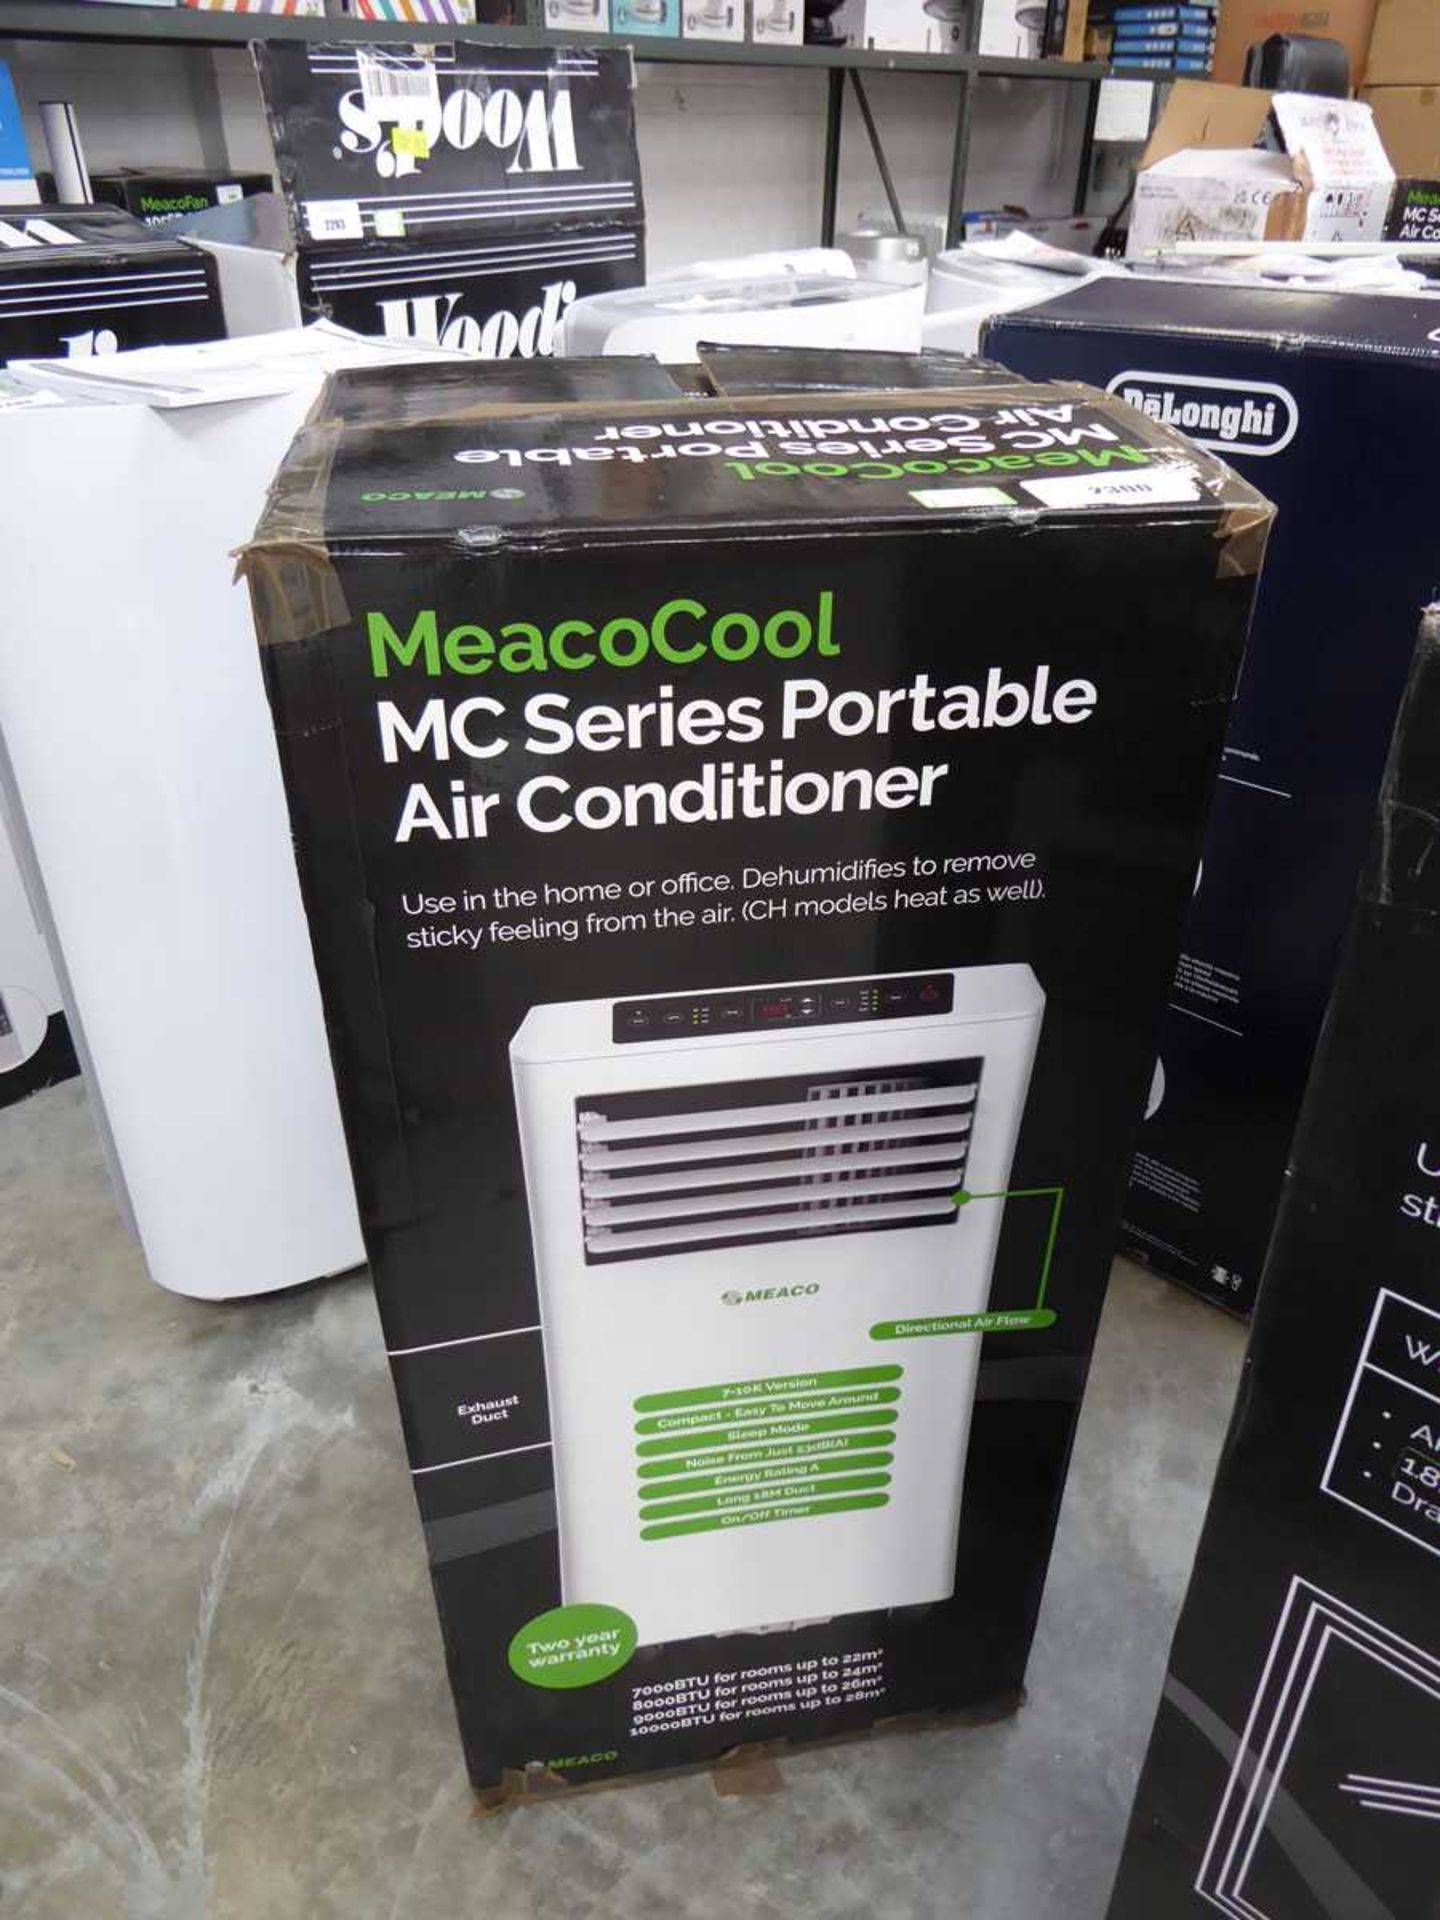 +VAT Boxed Meaco MC Series portable air conditioning unit